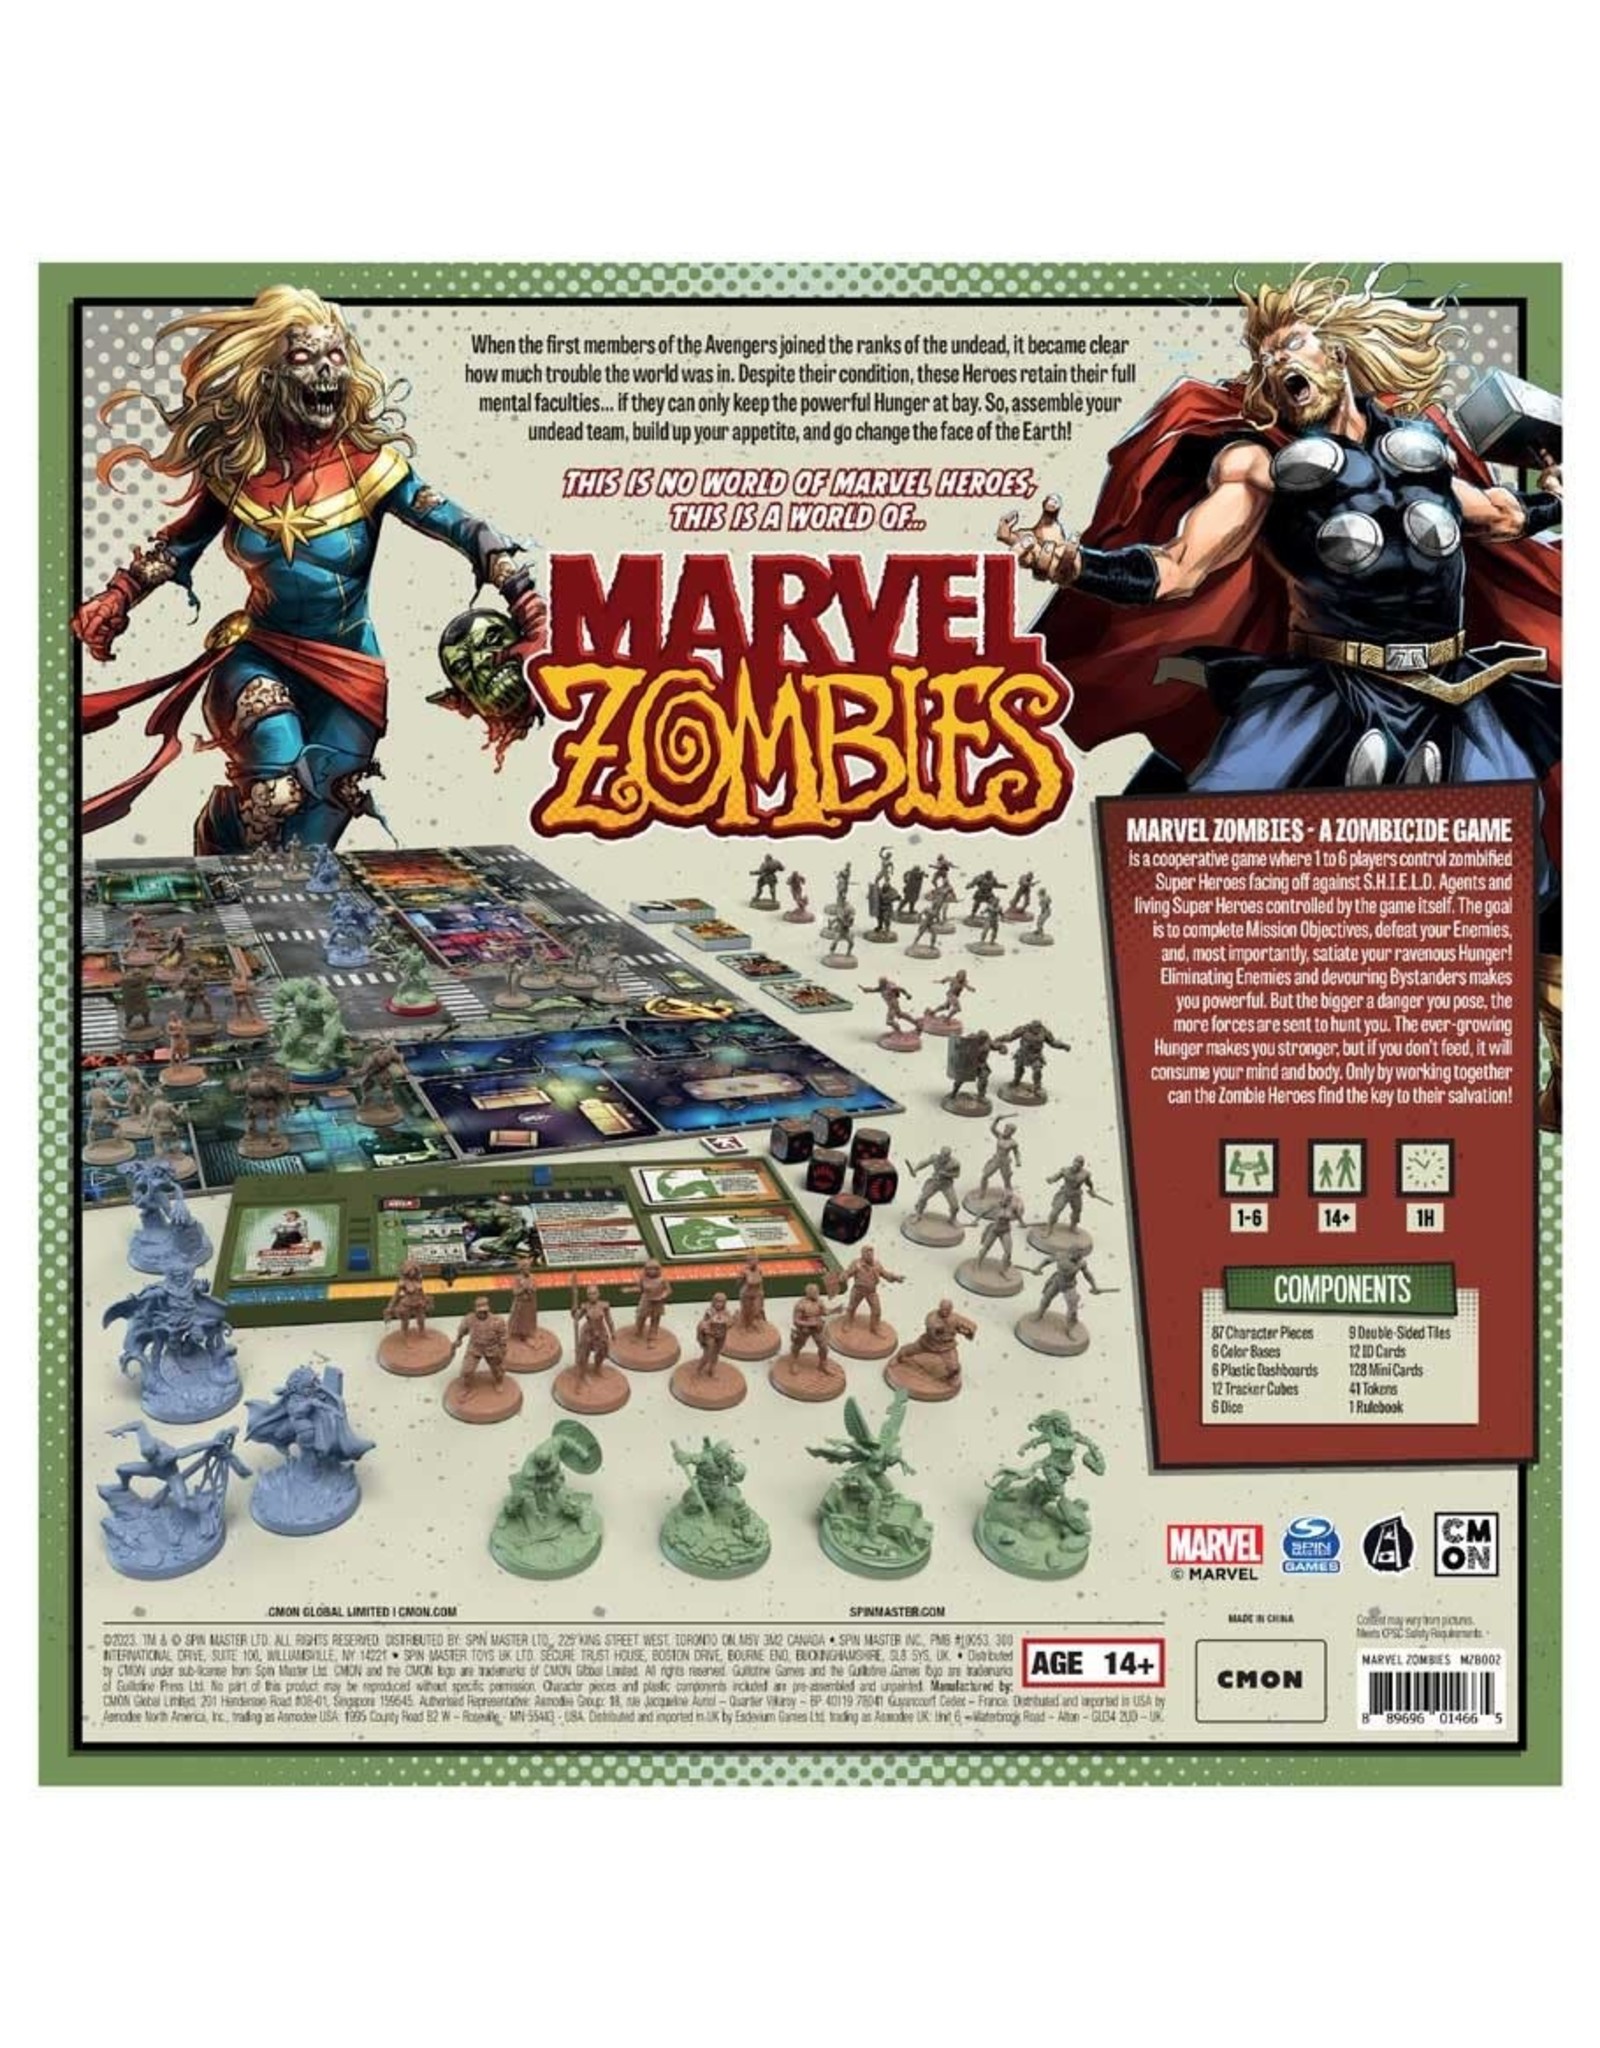 Cool Mini or Not Marvel Zombies: A Zombicide Game